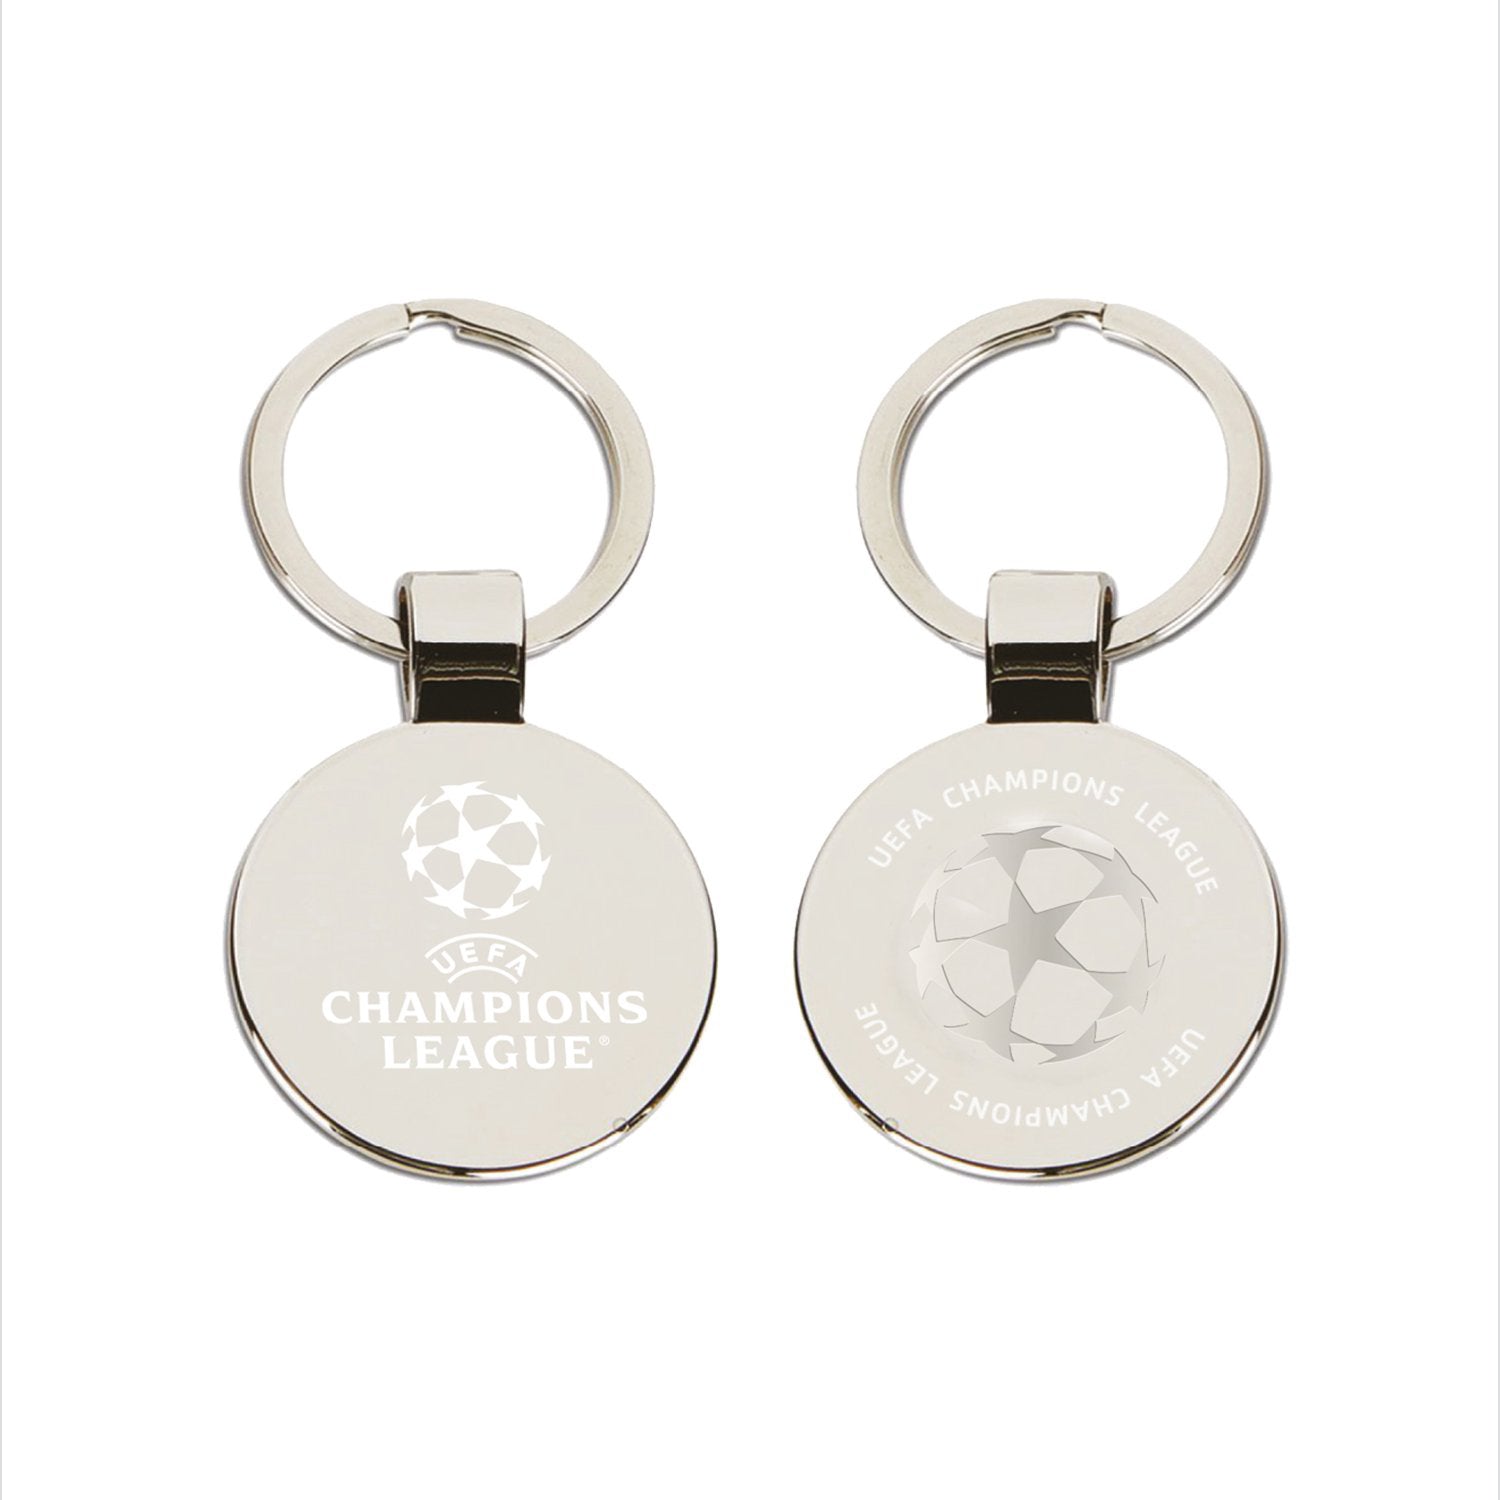 UEFA Champions League - 3D Starball Keyring UEFA Club Competitions Online Store